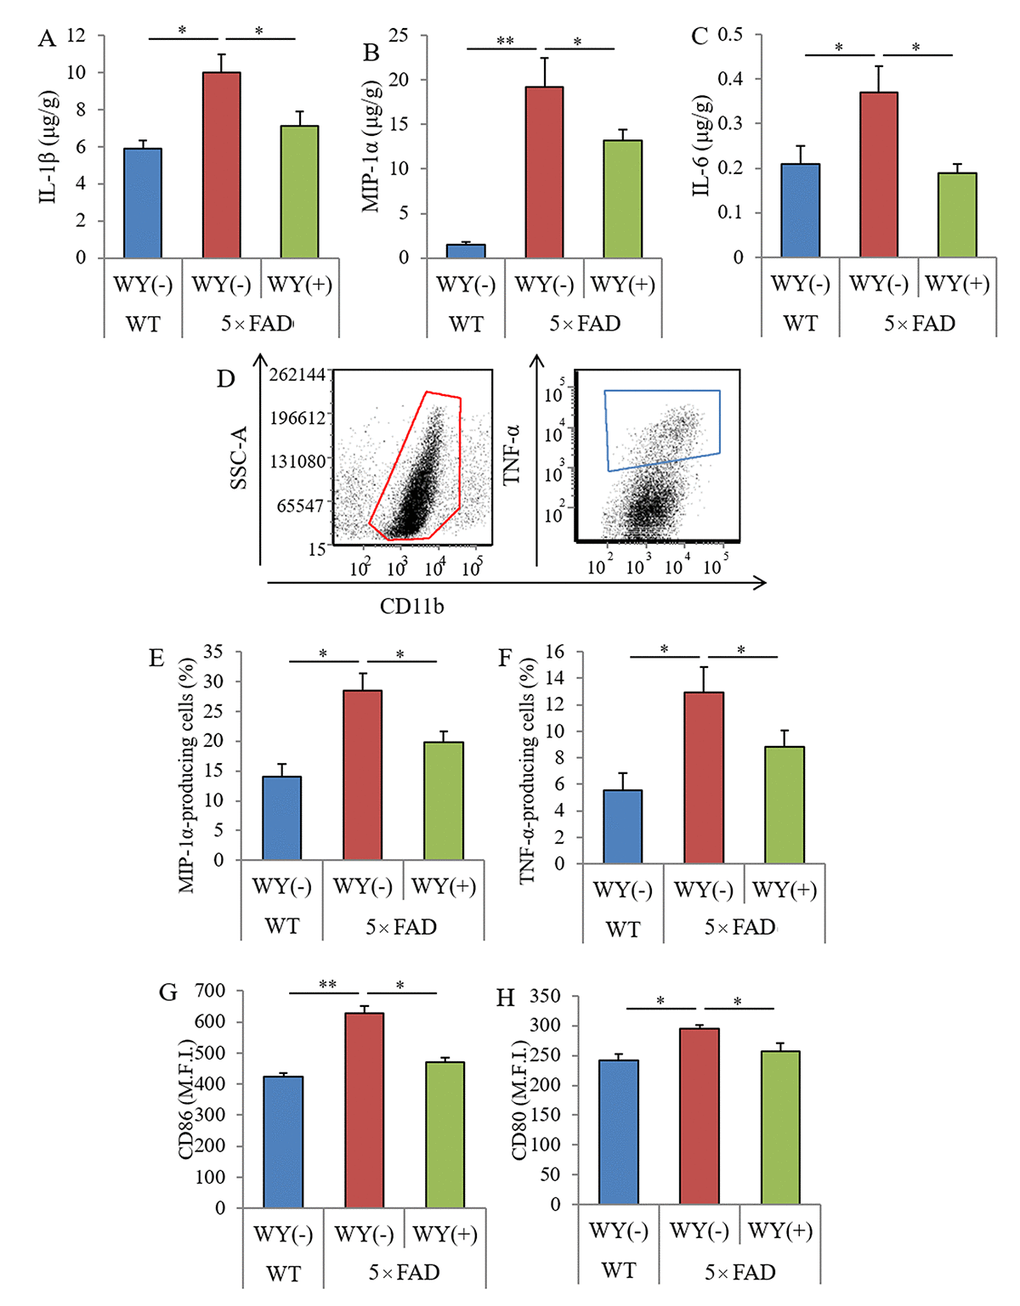 Effects of WY peptides on inflammation and the activation of microglia in 5×FAD mice. For 3 months, 2.5-month-old transgenic 5×FAD and wild-type male mice were fed a diet with or without 0.05% w/w WY peptide. (A–C) The levels of IL-1β, MIP-1α, and IL-6 in the hippocampus, respectively. Data represent the means ± SEM of 12 wild-type mice, 11 control transgenic mice, and 12 transgenic mice fed with the diet containing WY peptide. (D) Characterization of CD11b-positive microglia in the brain isolated with MACS by flow cytometry. (E, F) Ratio of MIP-1α- and TNF-α-producing cells to CD11b-positive cells, respectively. (G, H) Expressions of CD80 and CD86 on CD11b-positive cells, respectively. M.F.I. is the mean fluorescent intensity. Data represent the means ± SEMs of 6 mice per group. p-values shown in the graph were calculated by one-way ANOVA followed by the Tukey–Kramer test. *p p 